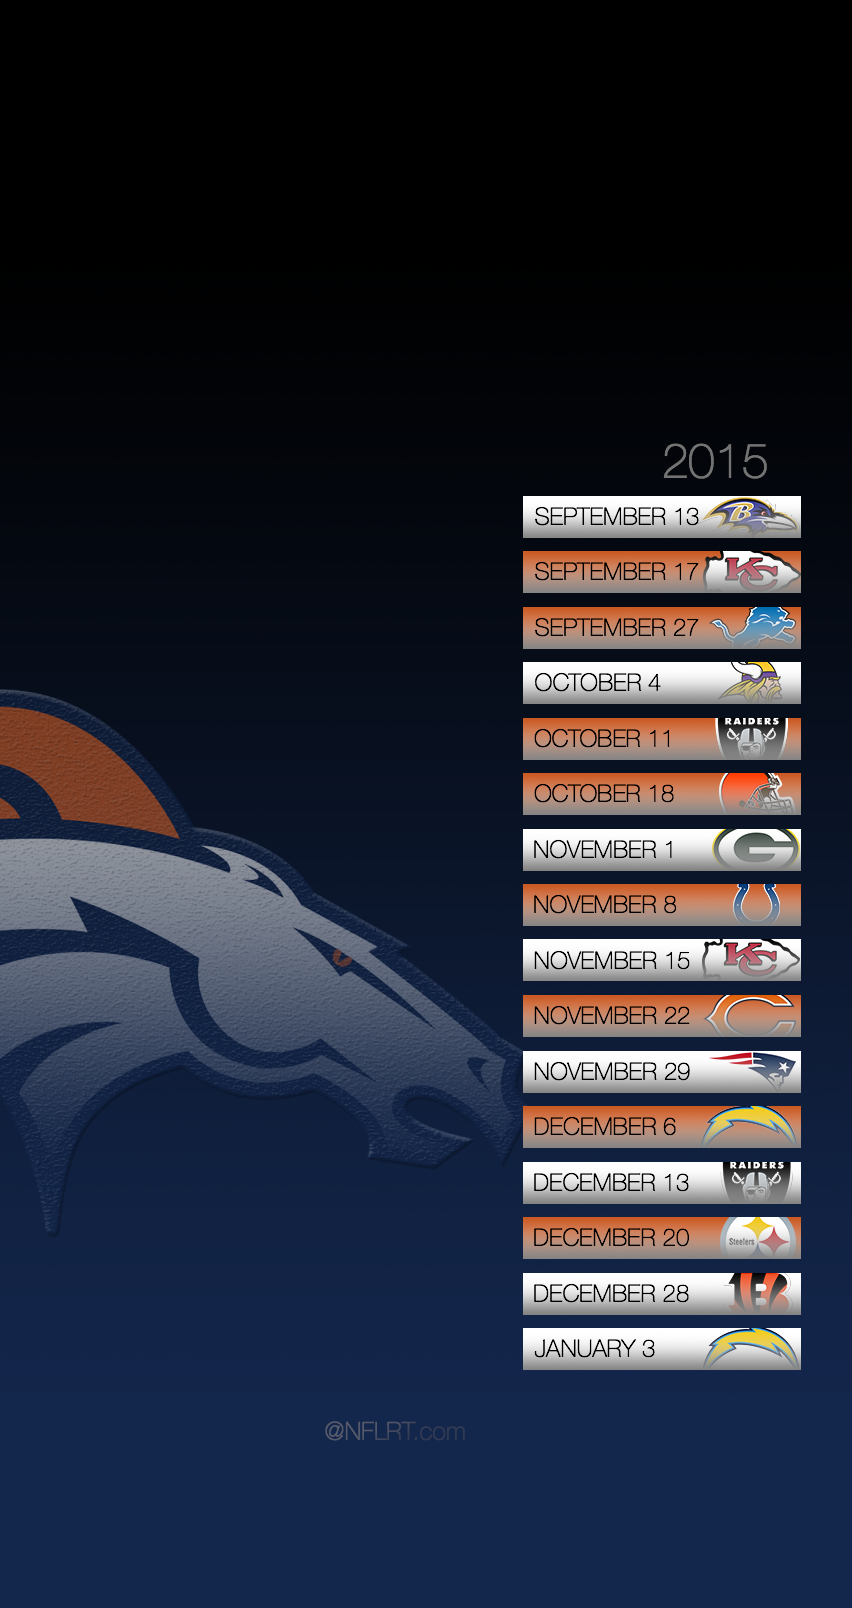 2015 NFL Schedule Wallpapers   Page 7 of 8   NFLRT